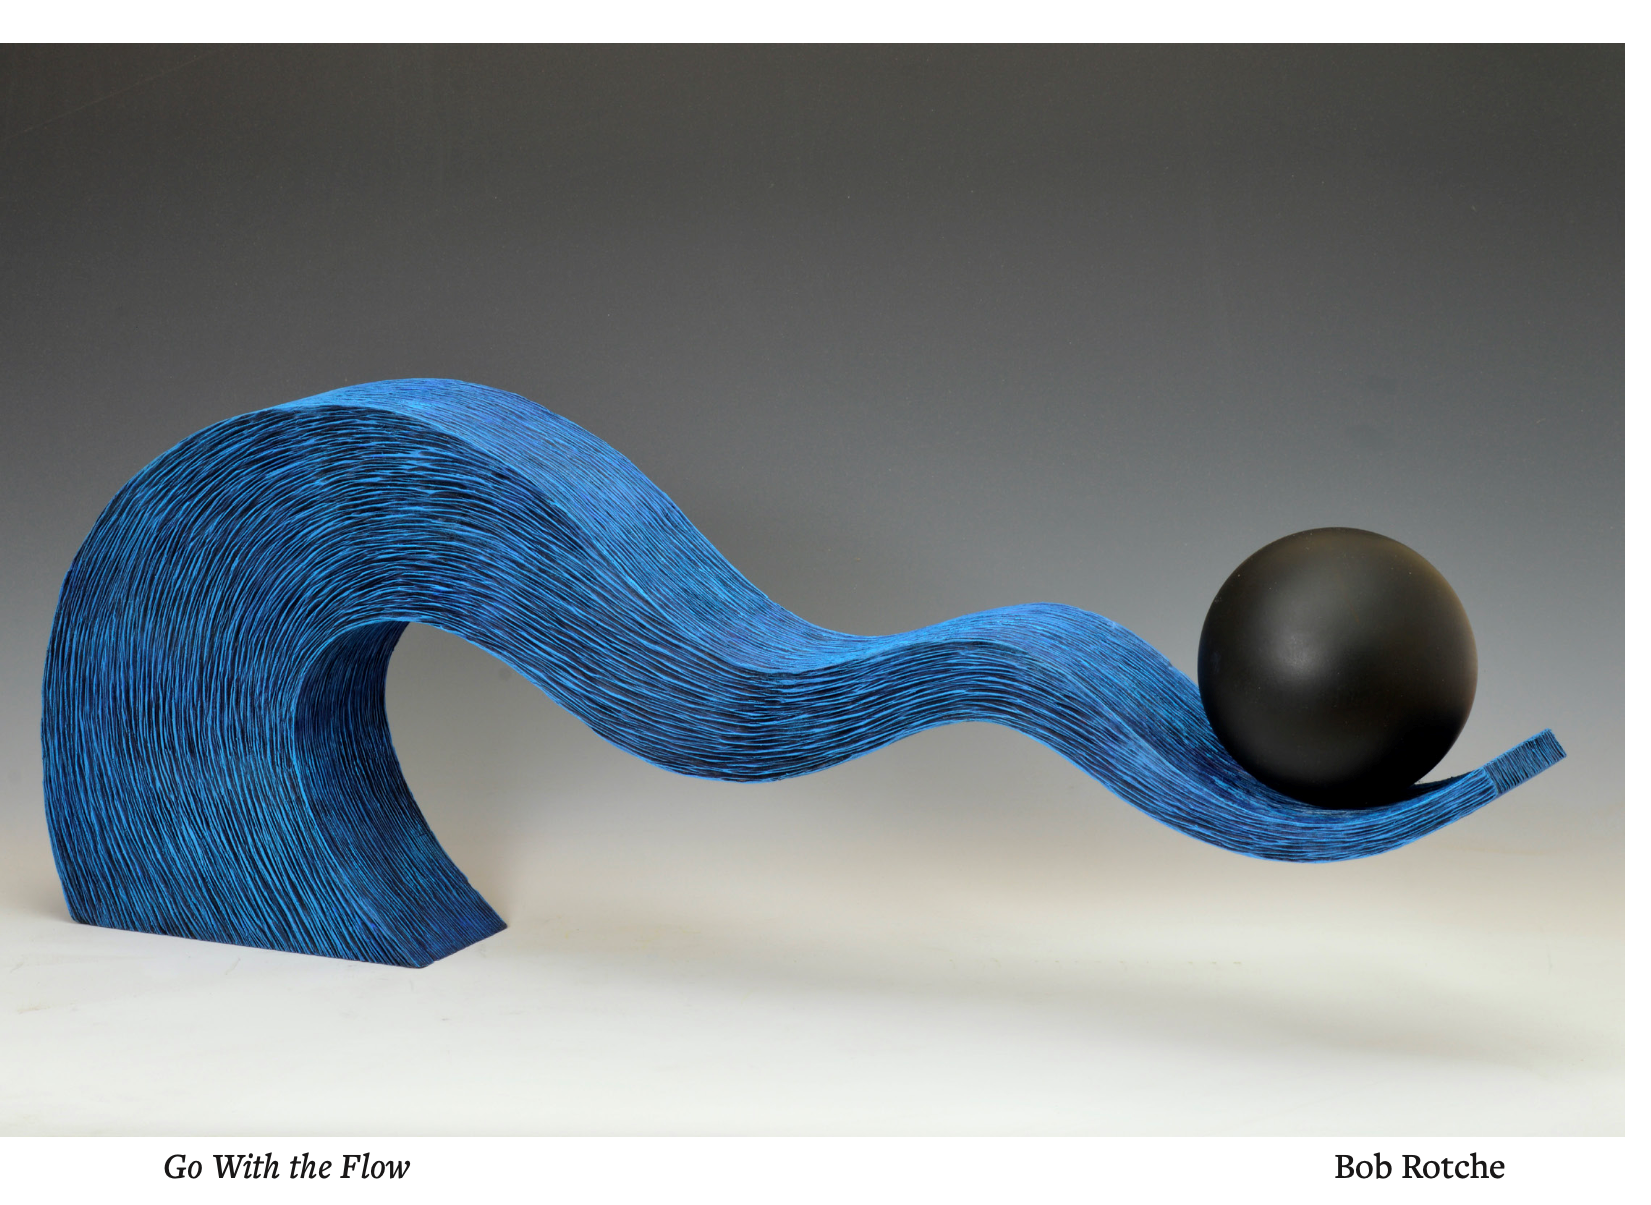 This digital rendering features a three dimensional, branch-like structure in the color blue that balances a black sphere at the very tip